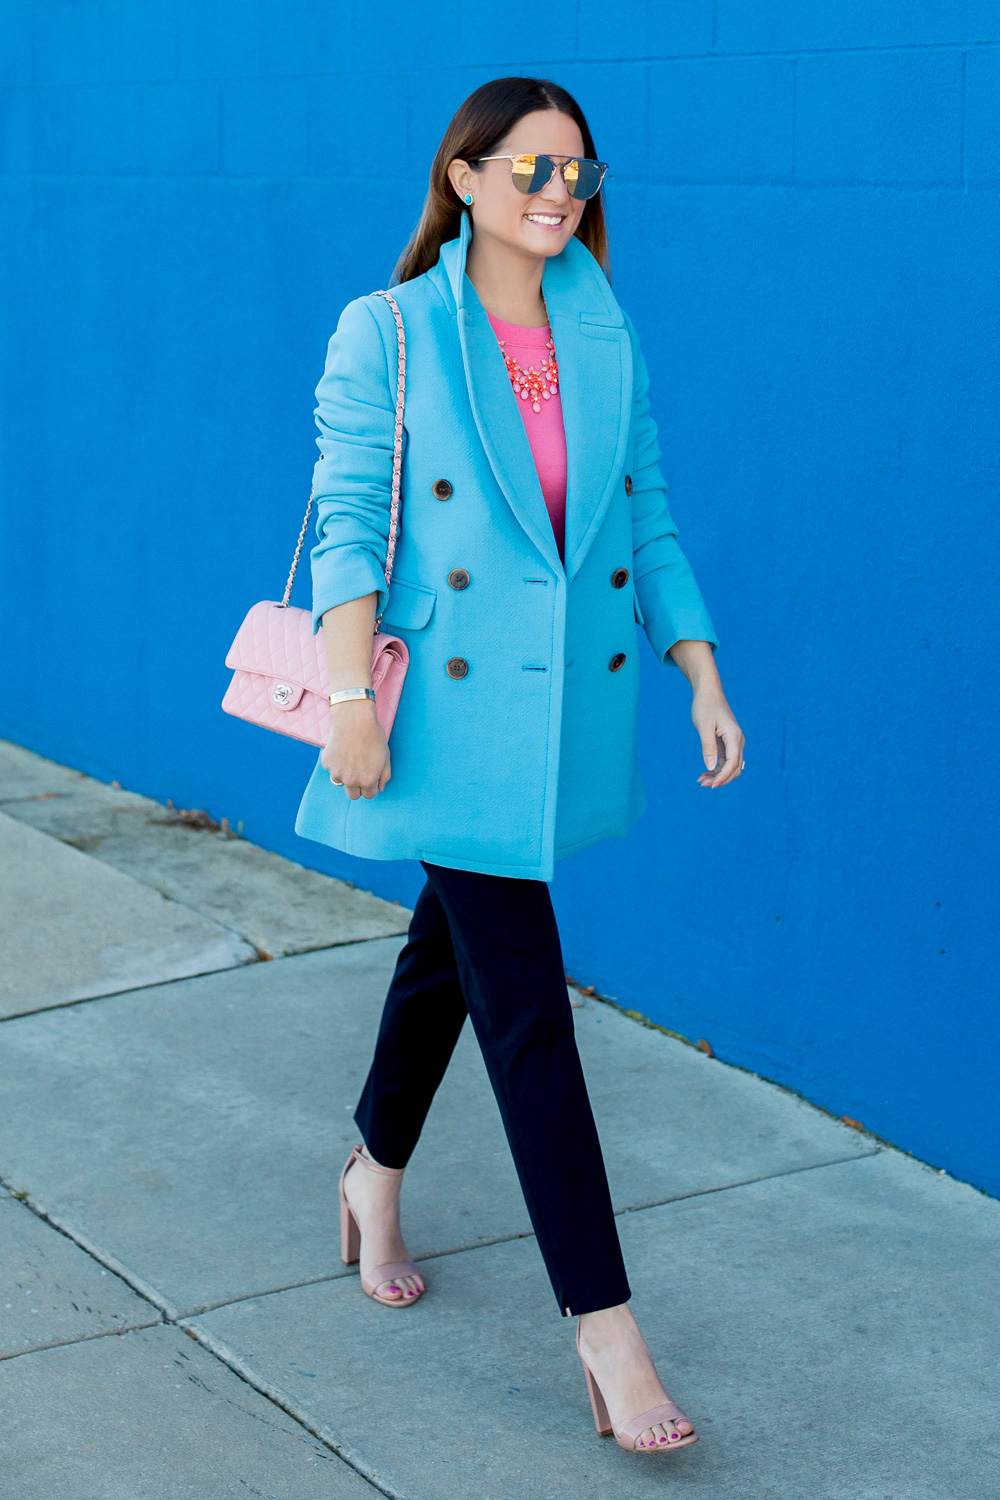 Jennifer Lake Style Charade in J Crew Nordstrom blue coat, pink cashmere sweater, pink Chanel quilted flap bag, and Steve Madden Carrson sandals at a blue wall in Chicago